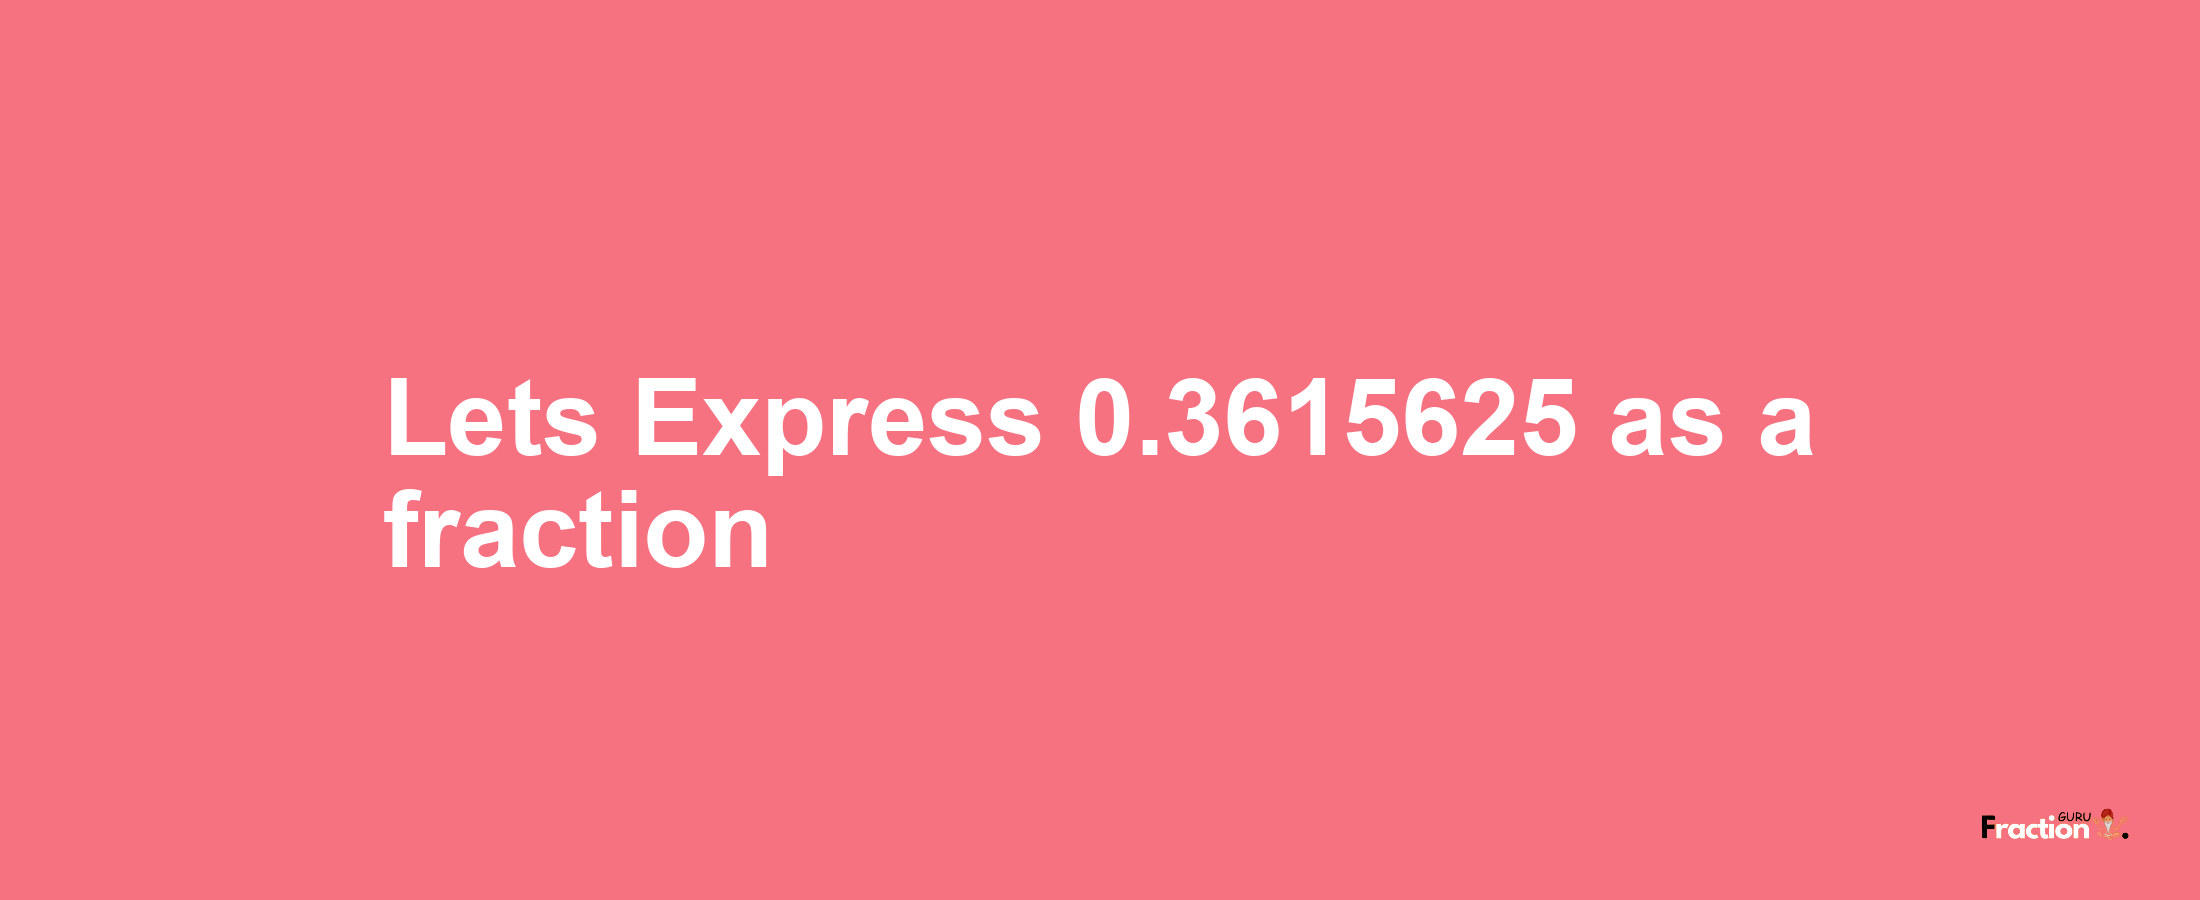 Lets Express 0.3615625 as afraction